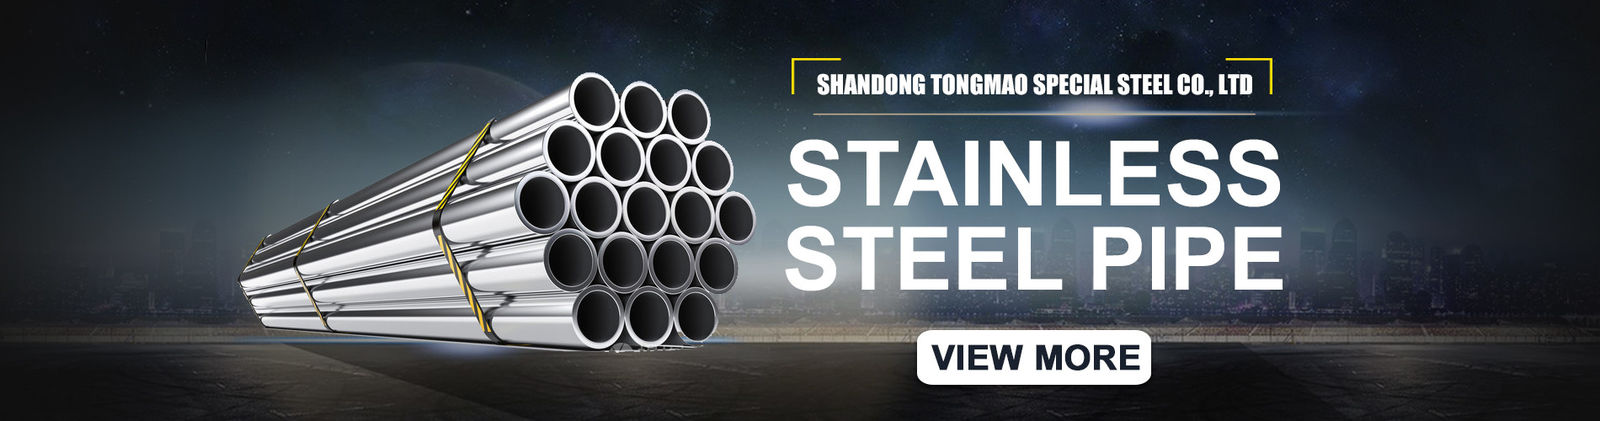 quality SS Steel Pipes factory